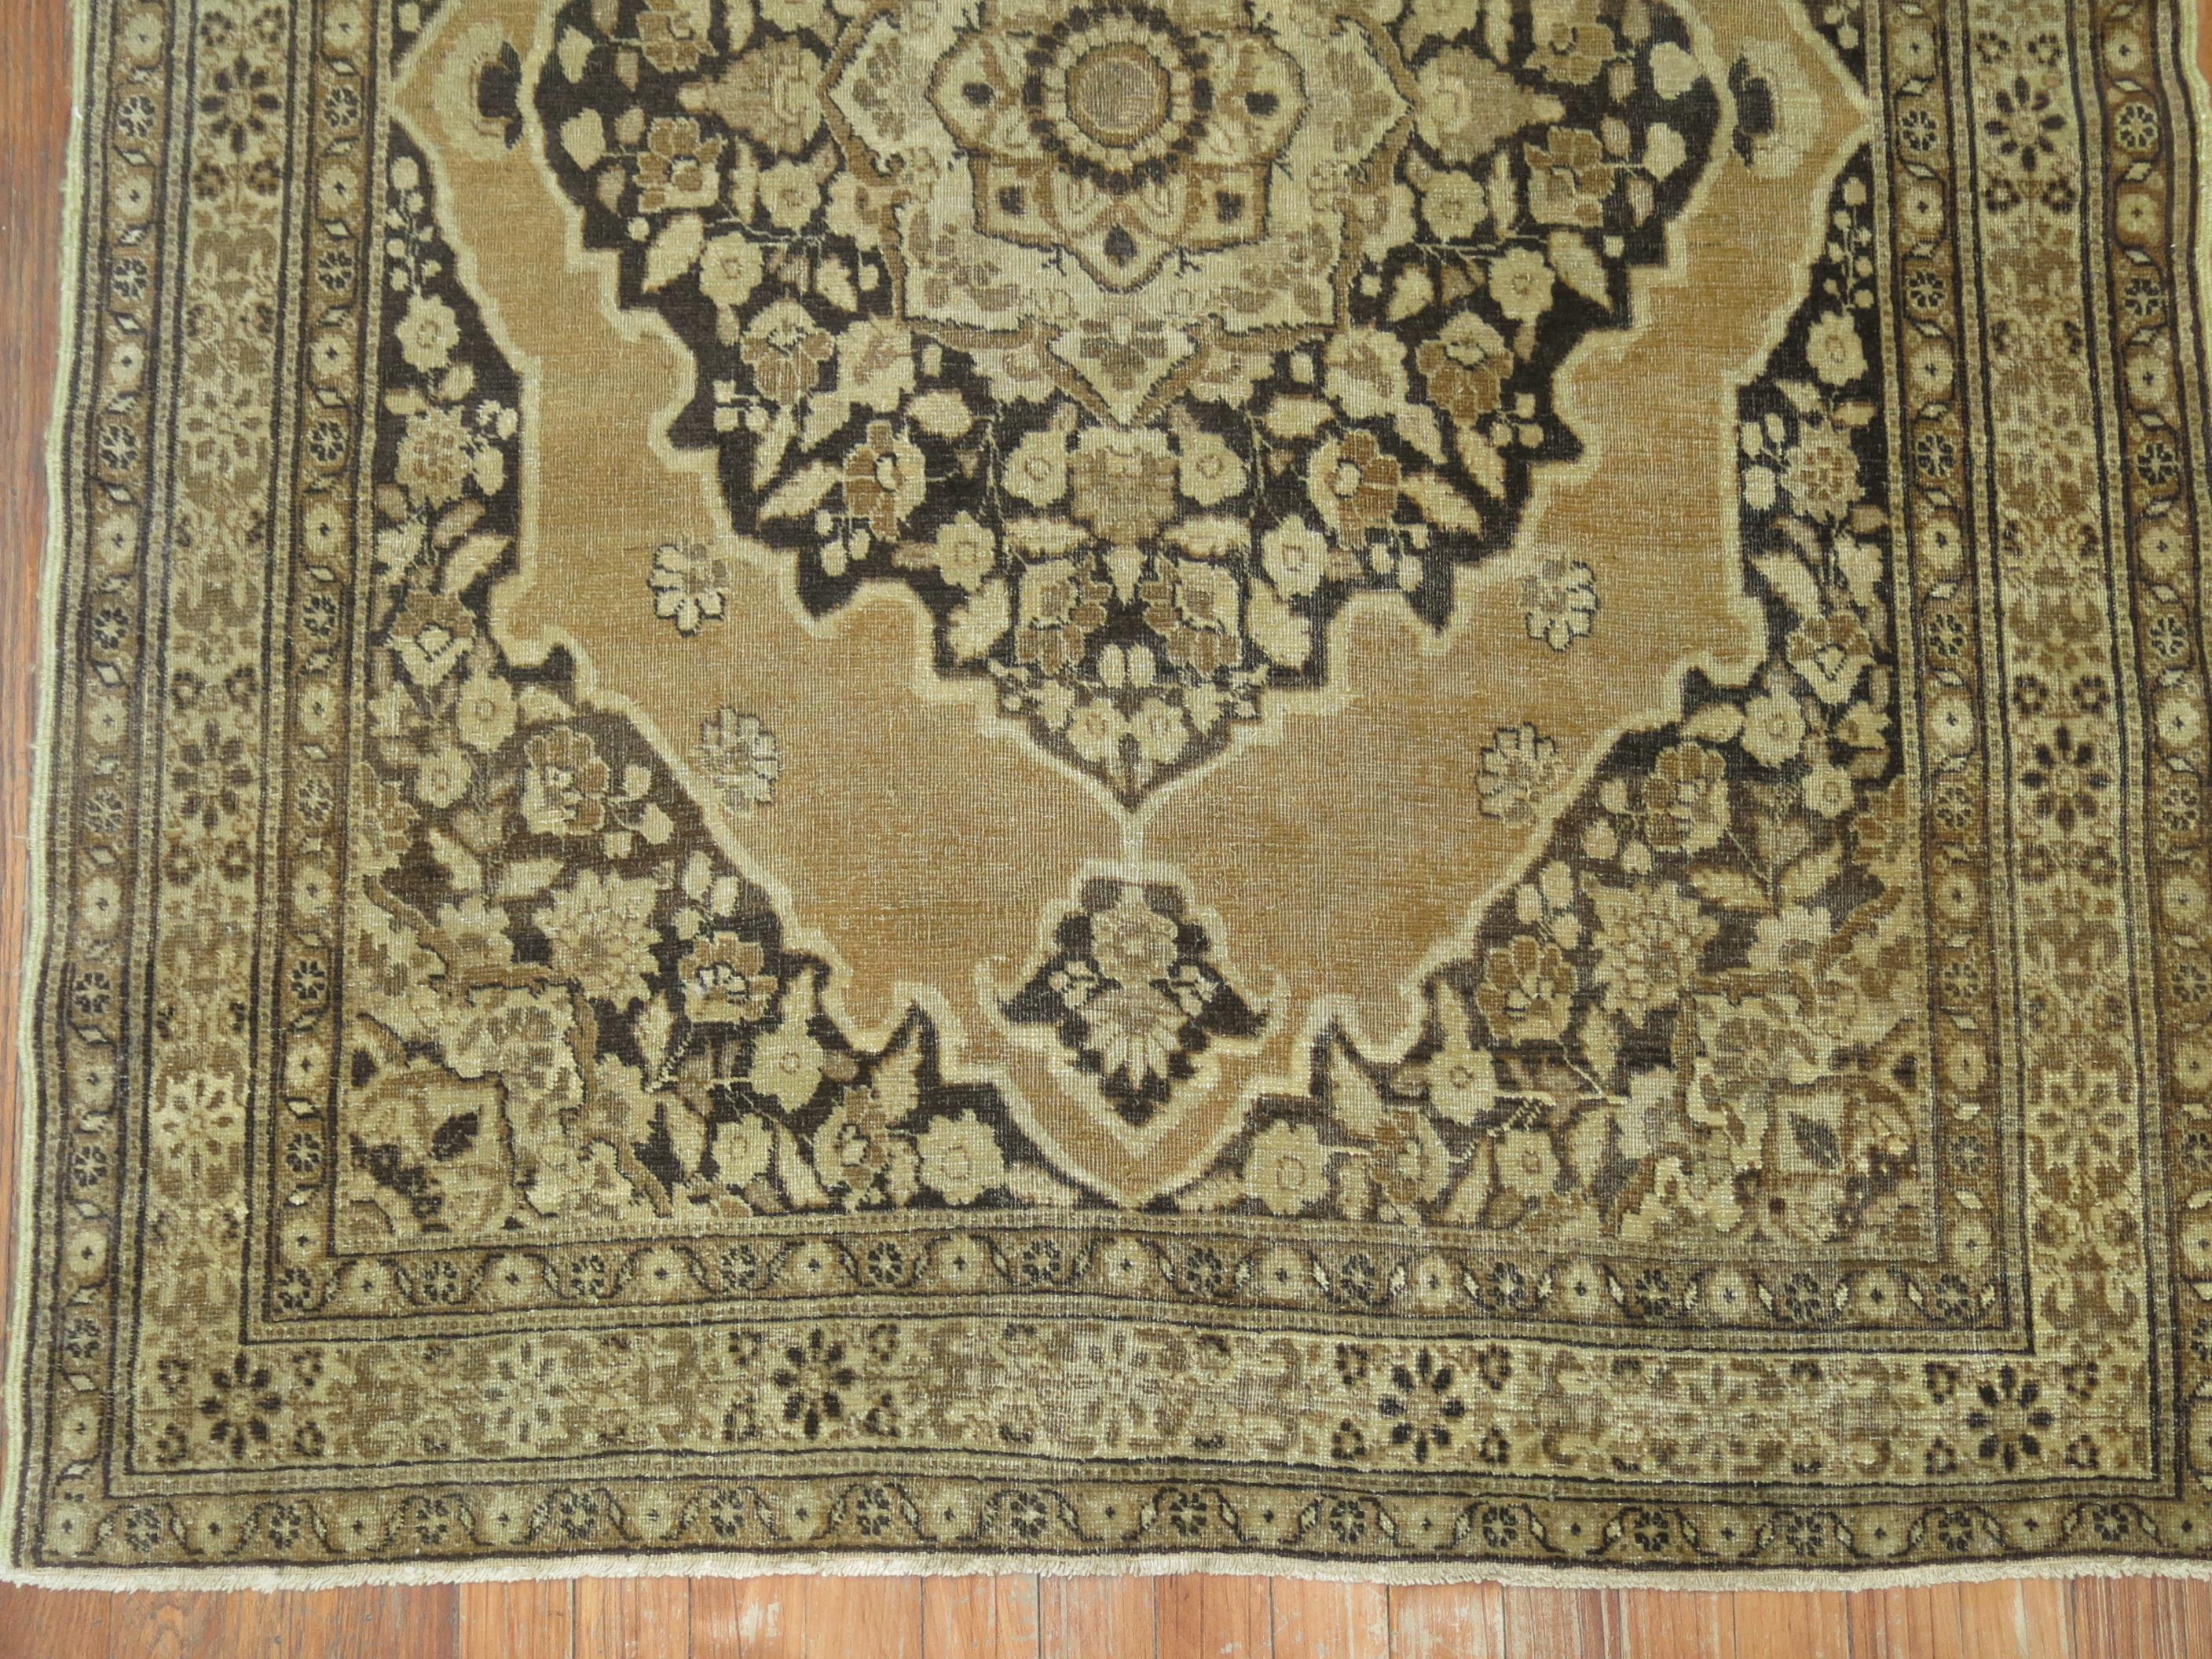 An early 20th century authentic antique Persian Tabriz rug. If your are fond of brown then this is the perfect rug.